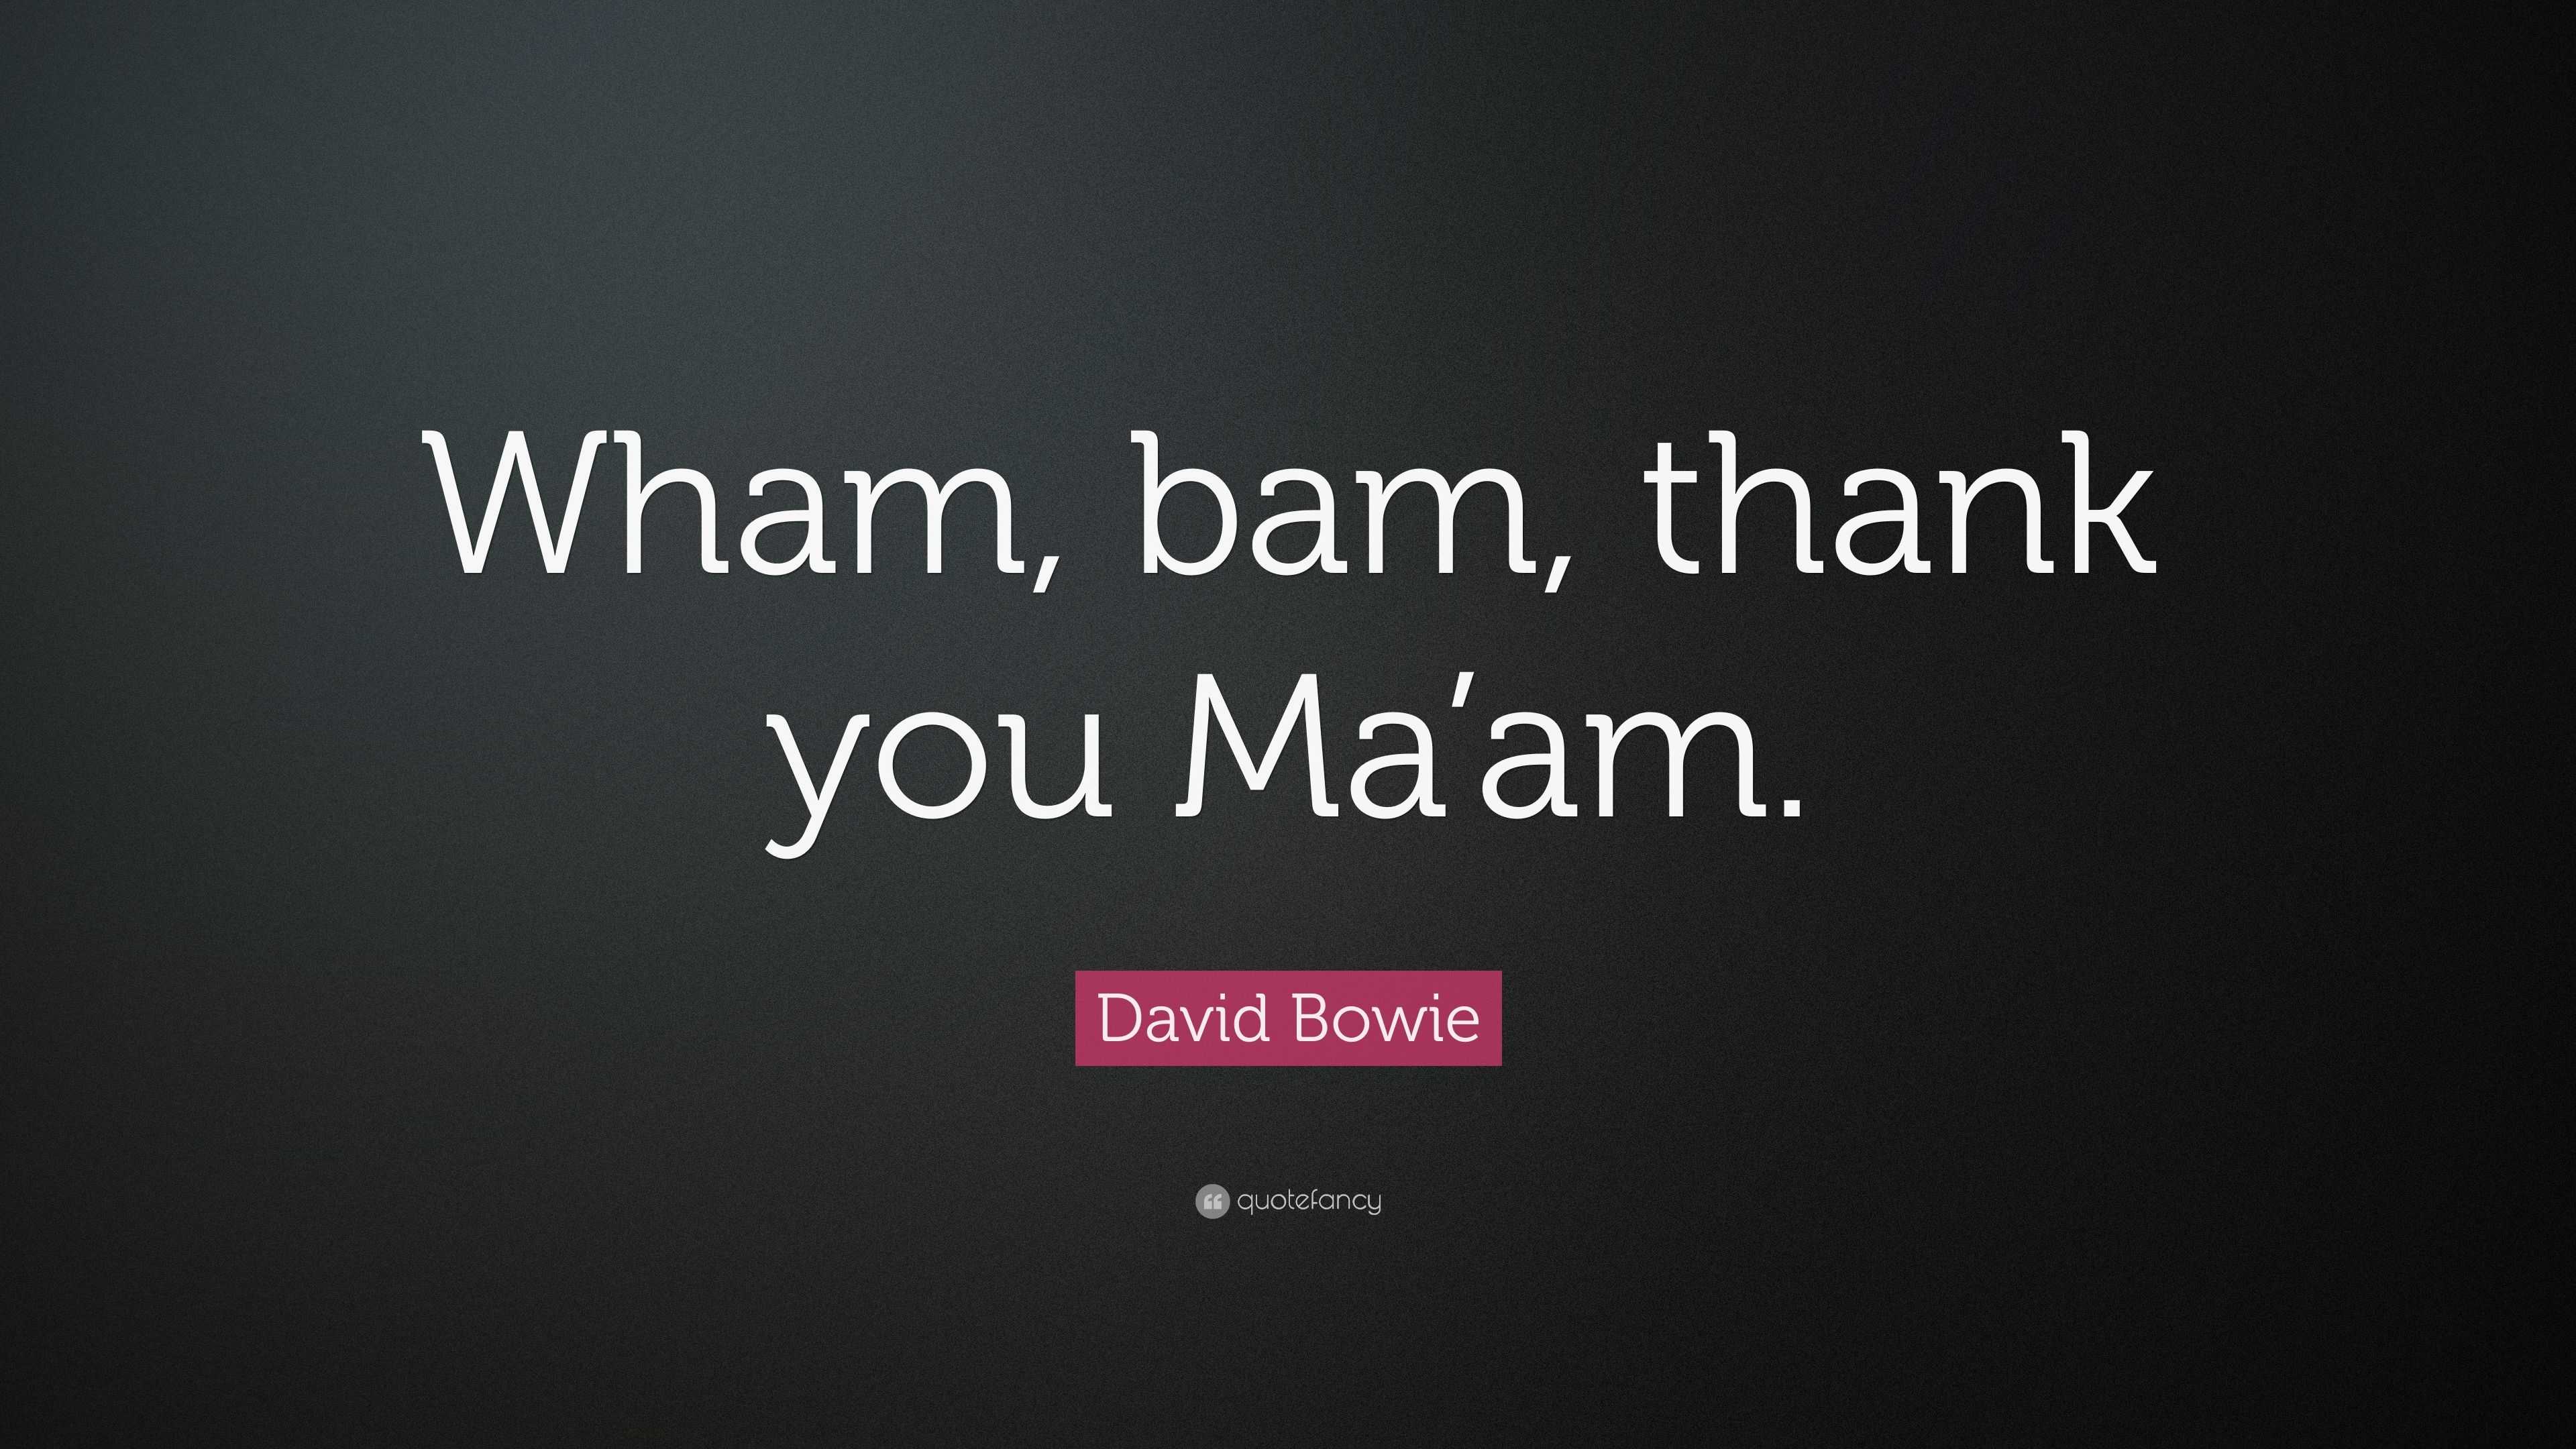 David Bowie Quote “wham Bam Thank You Maam” 5323